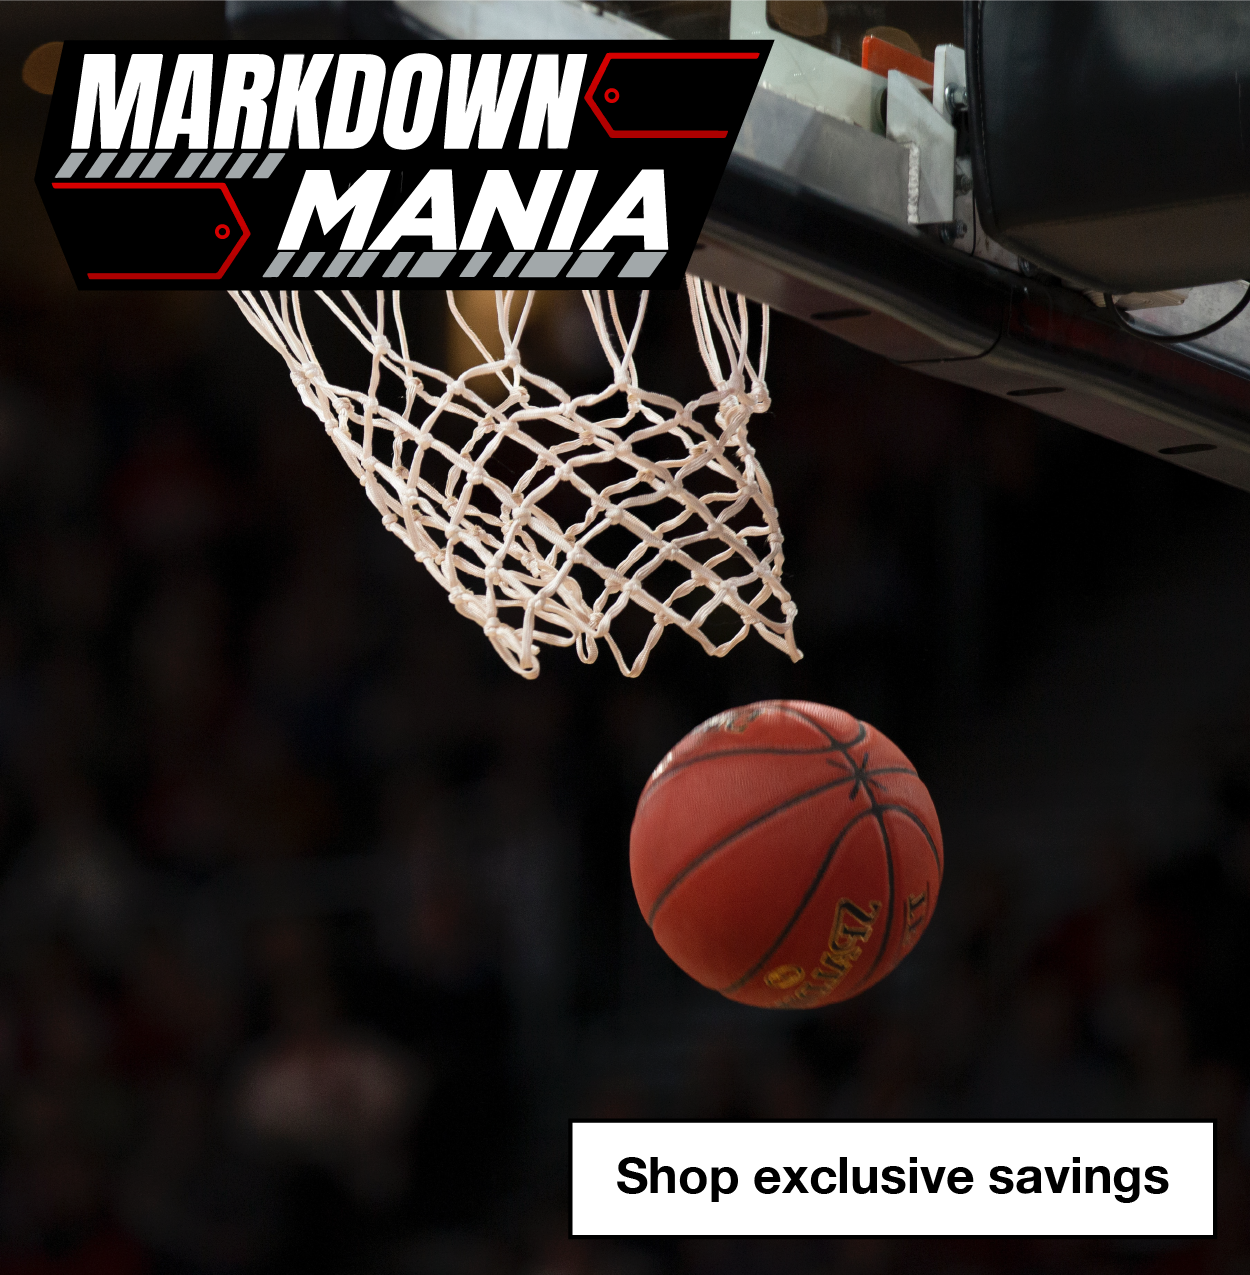 Markdown Mania! Gear up for the games & save!